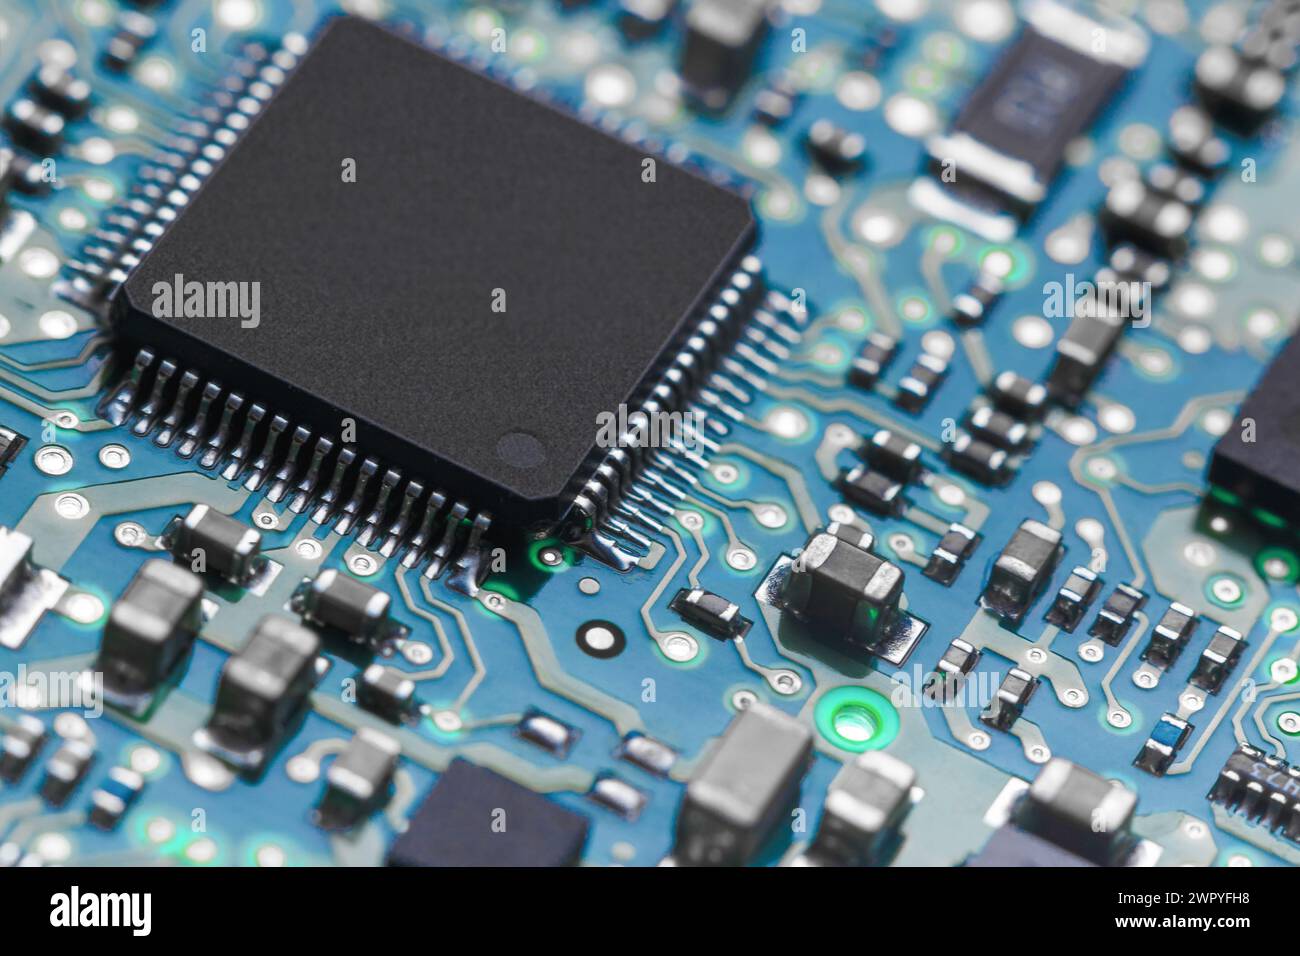 A close-up of a printed circuit board with a processor and various elements in backlight. Stock Photo